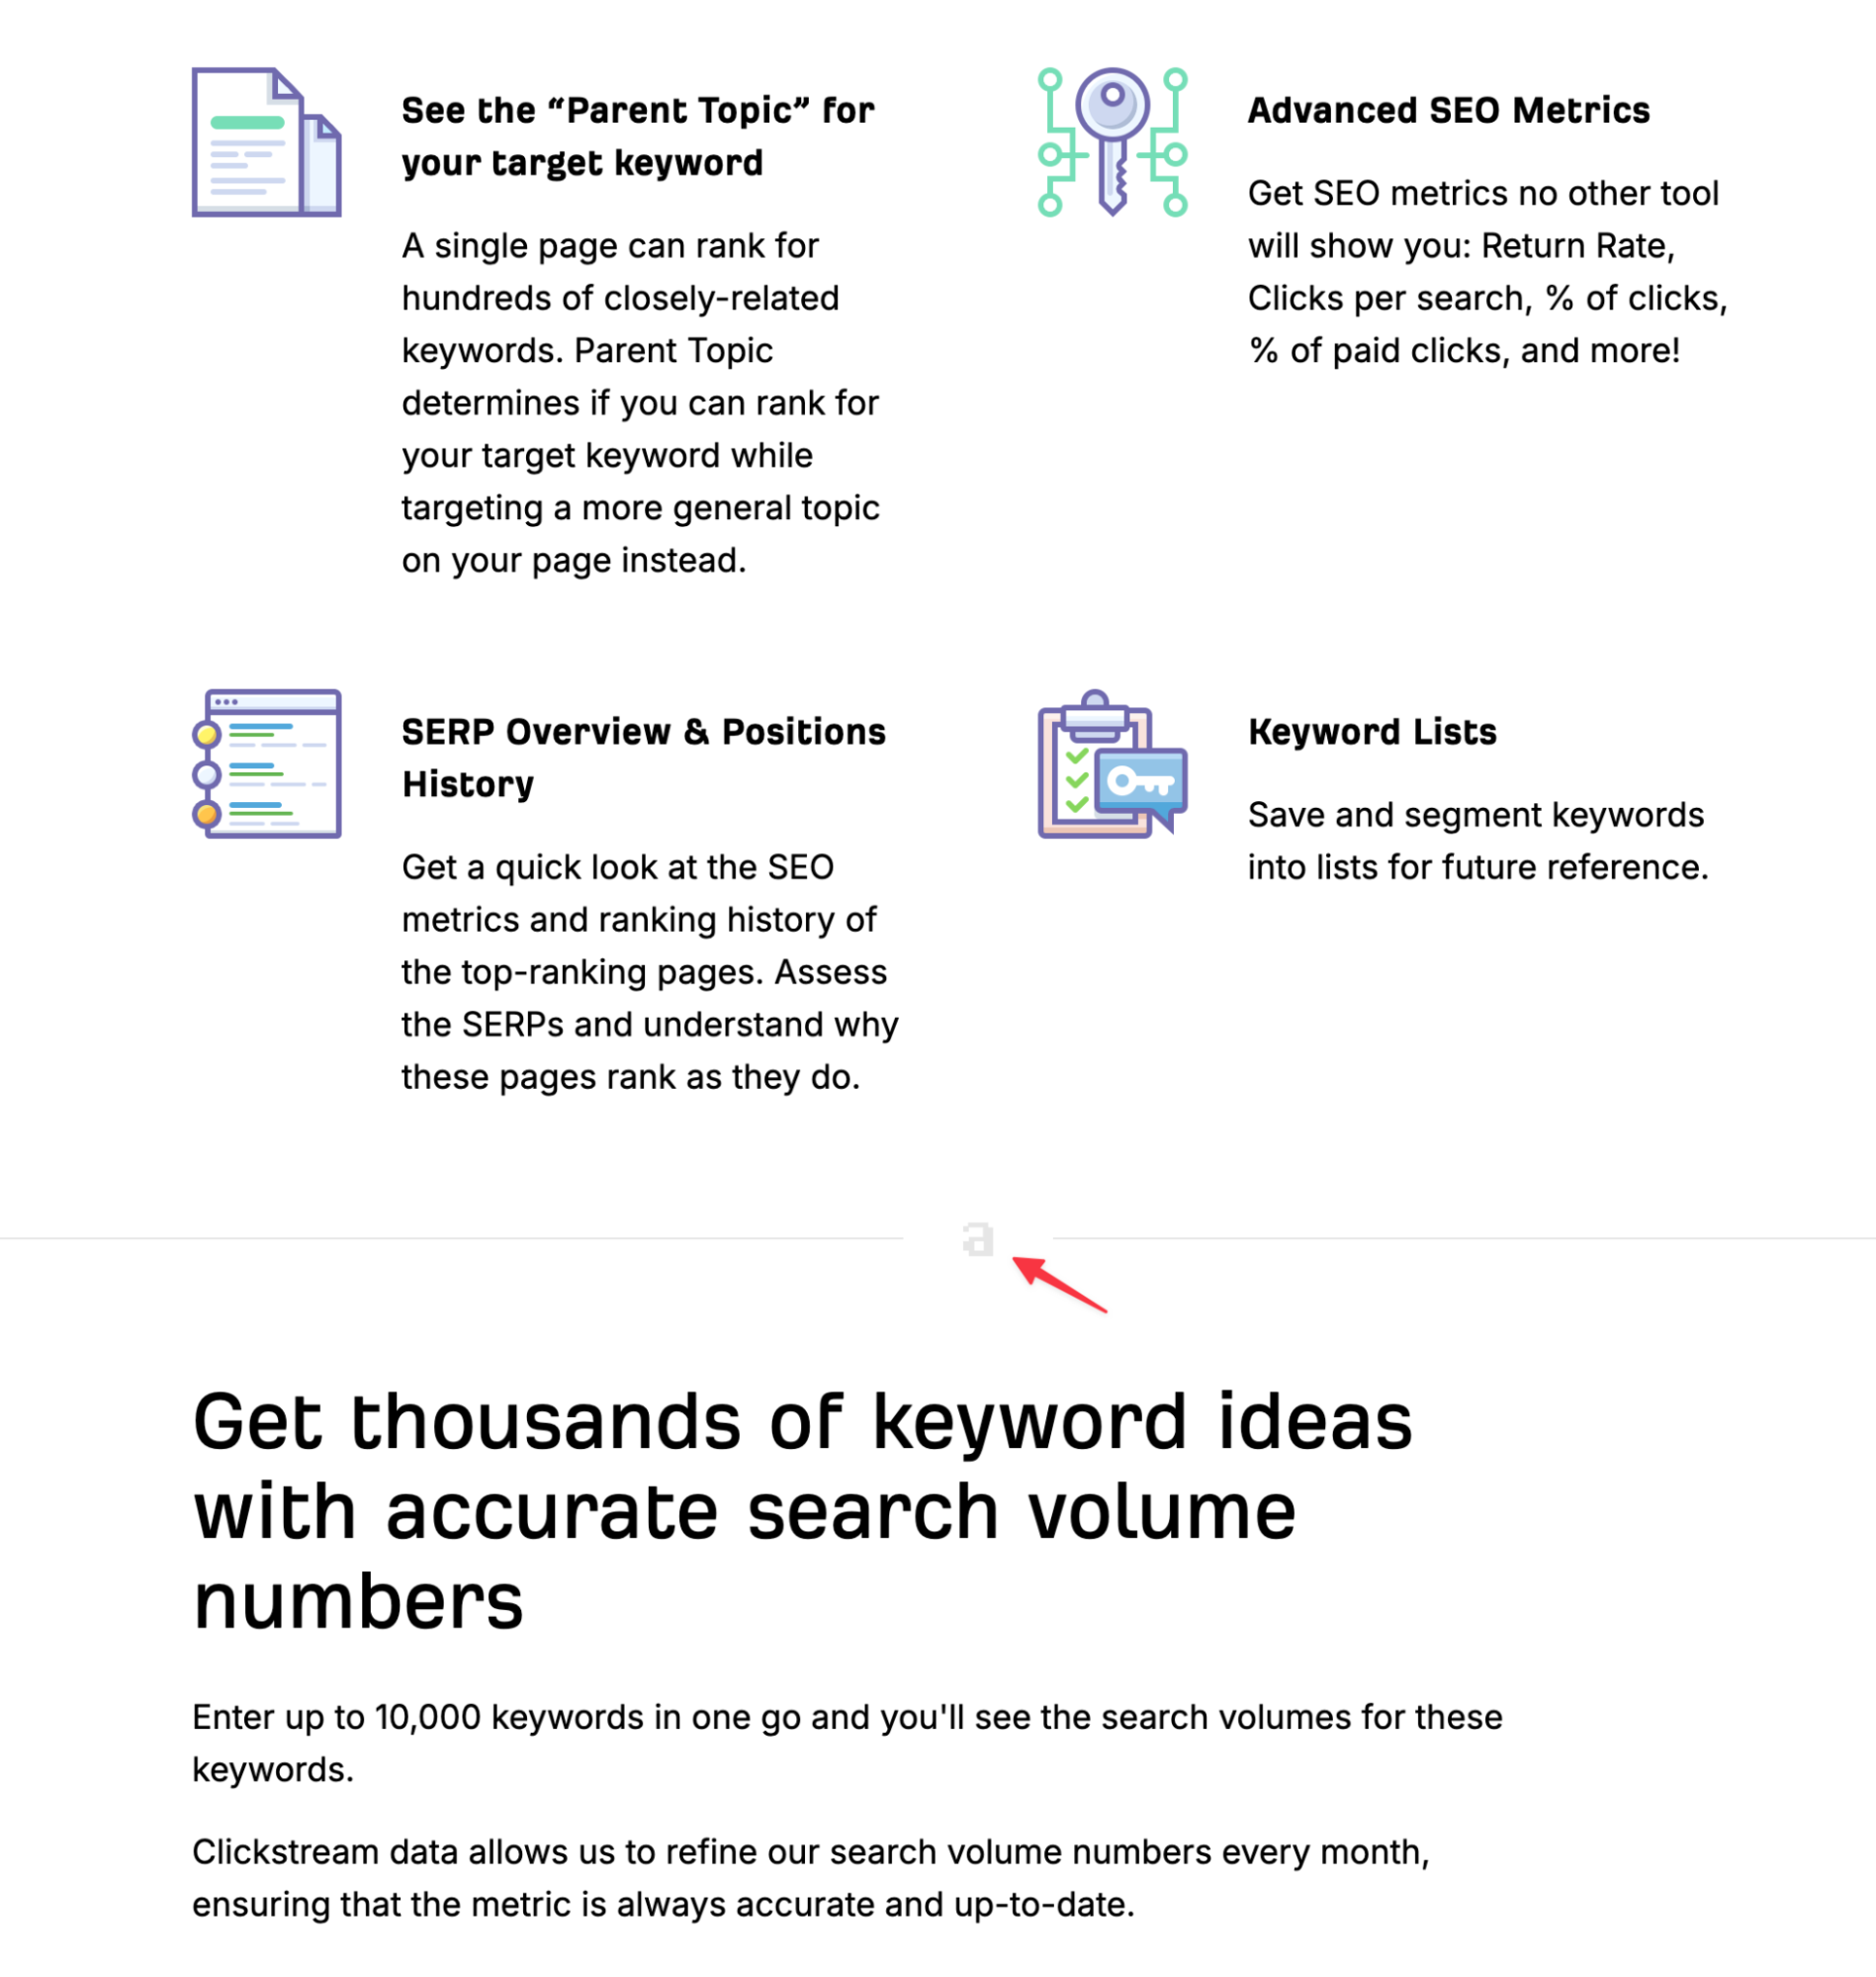 Landing page for Ahrefs’ keyword research tool.